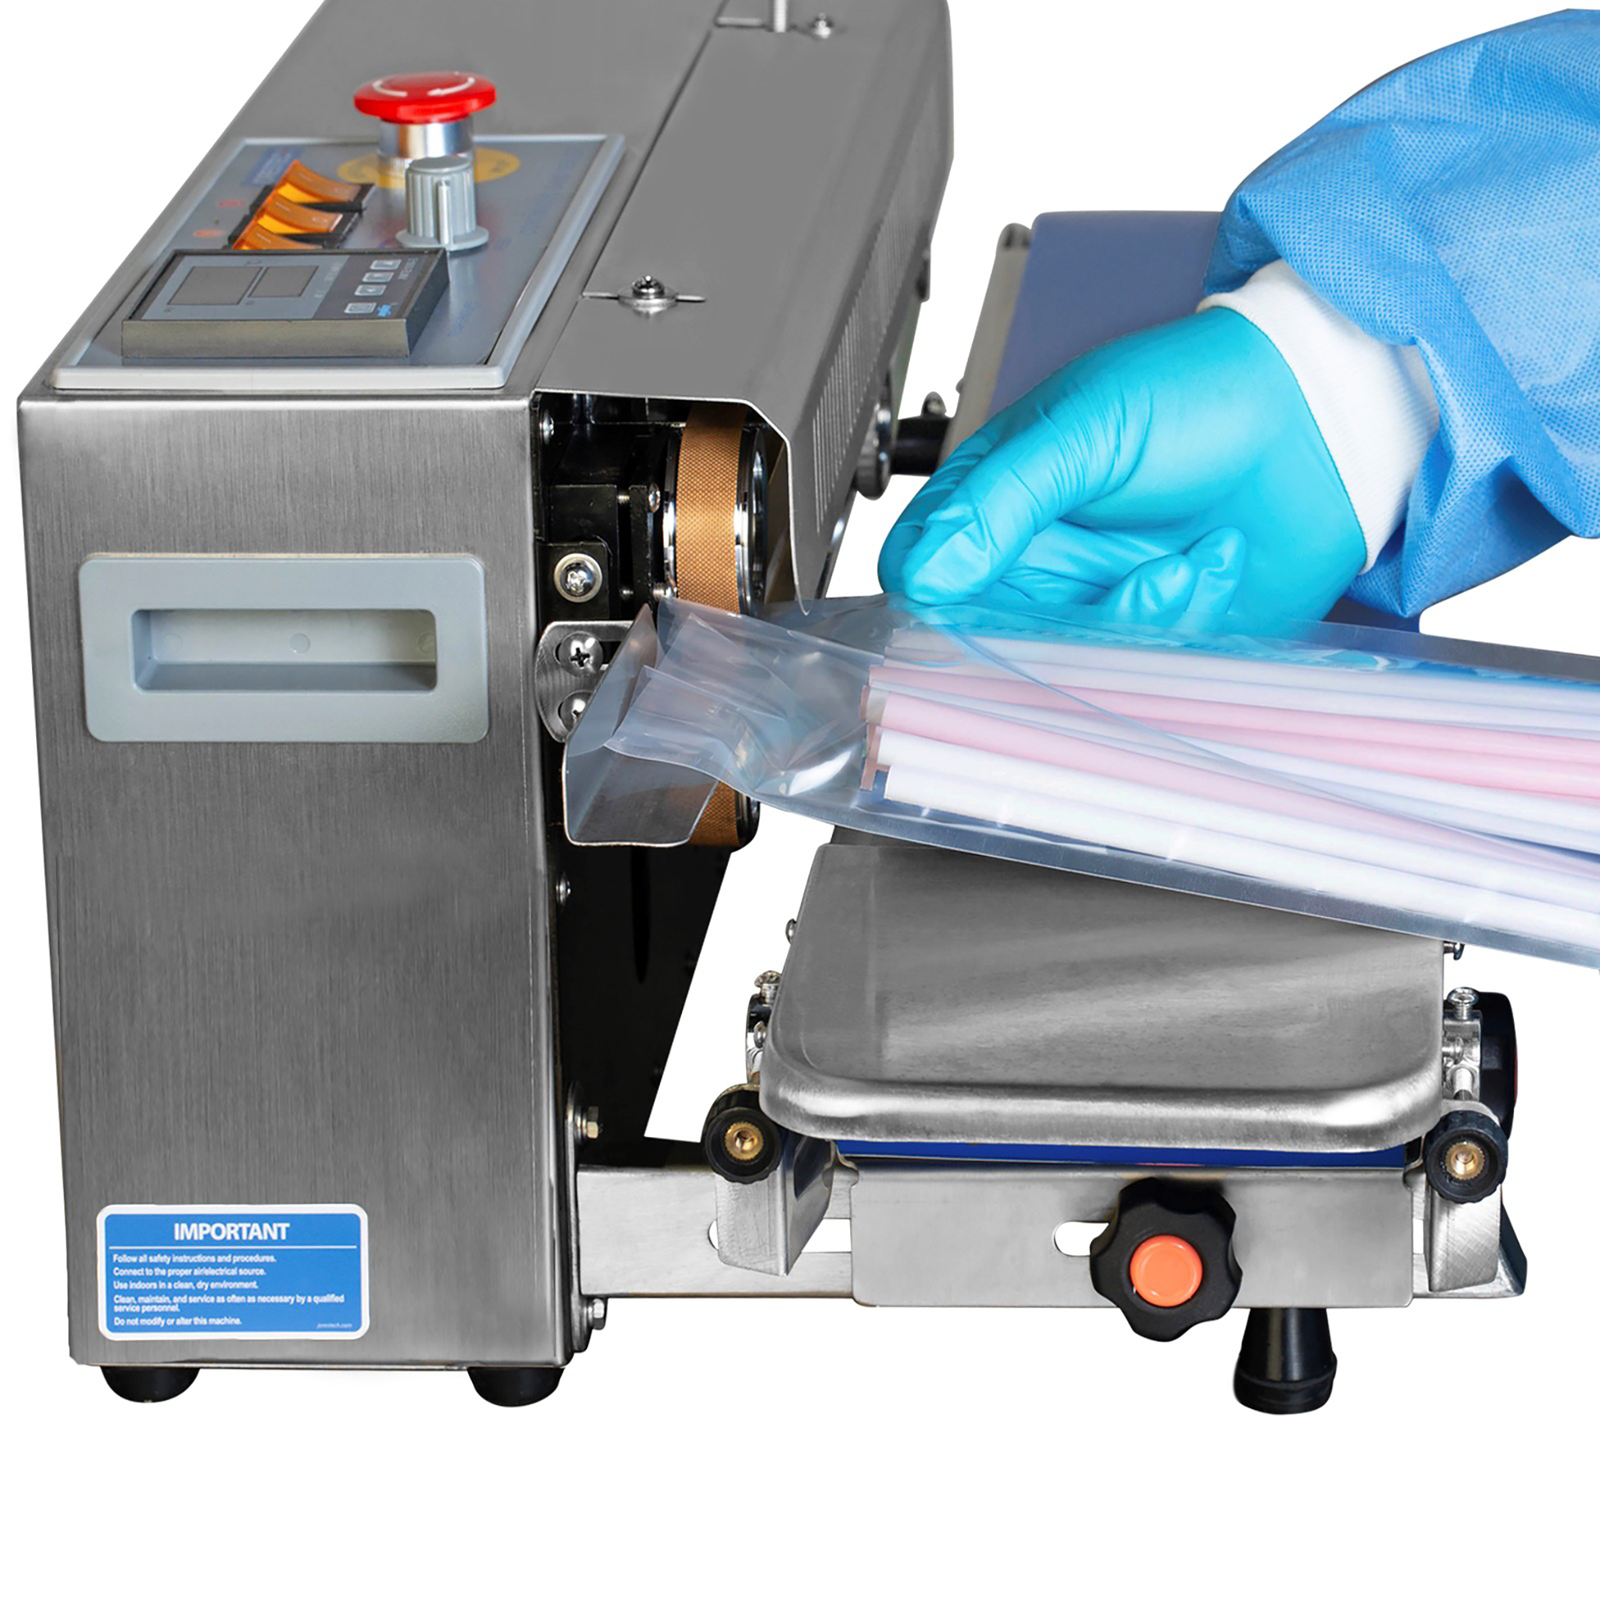 Operator inserting a clear bag filled with multi-colored straws from left side of a JORES TECHNOLOGIES® left to right continuous band sealer with digital temperature control panel to get the plastic bag sealed.